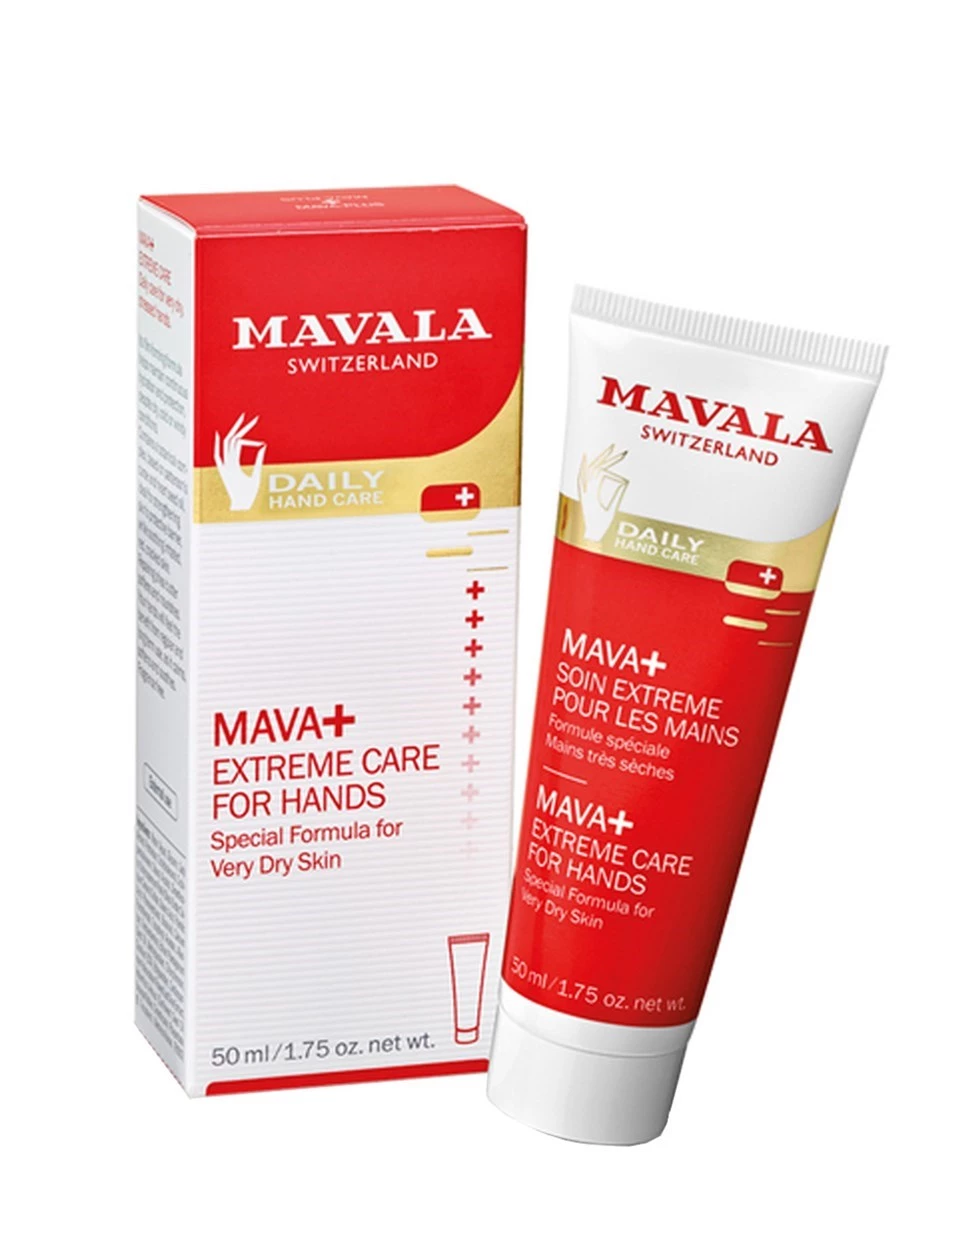 Mavala Extreme Care For Hands 50ml